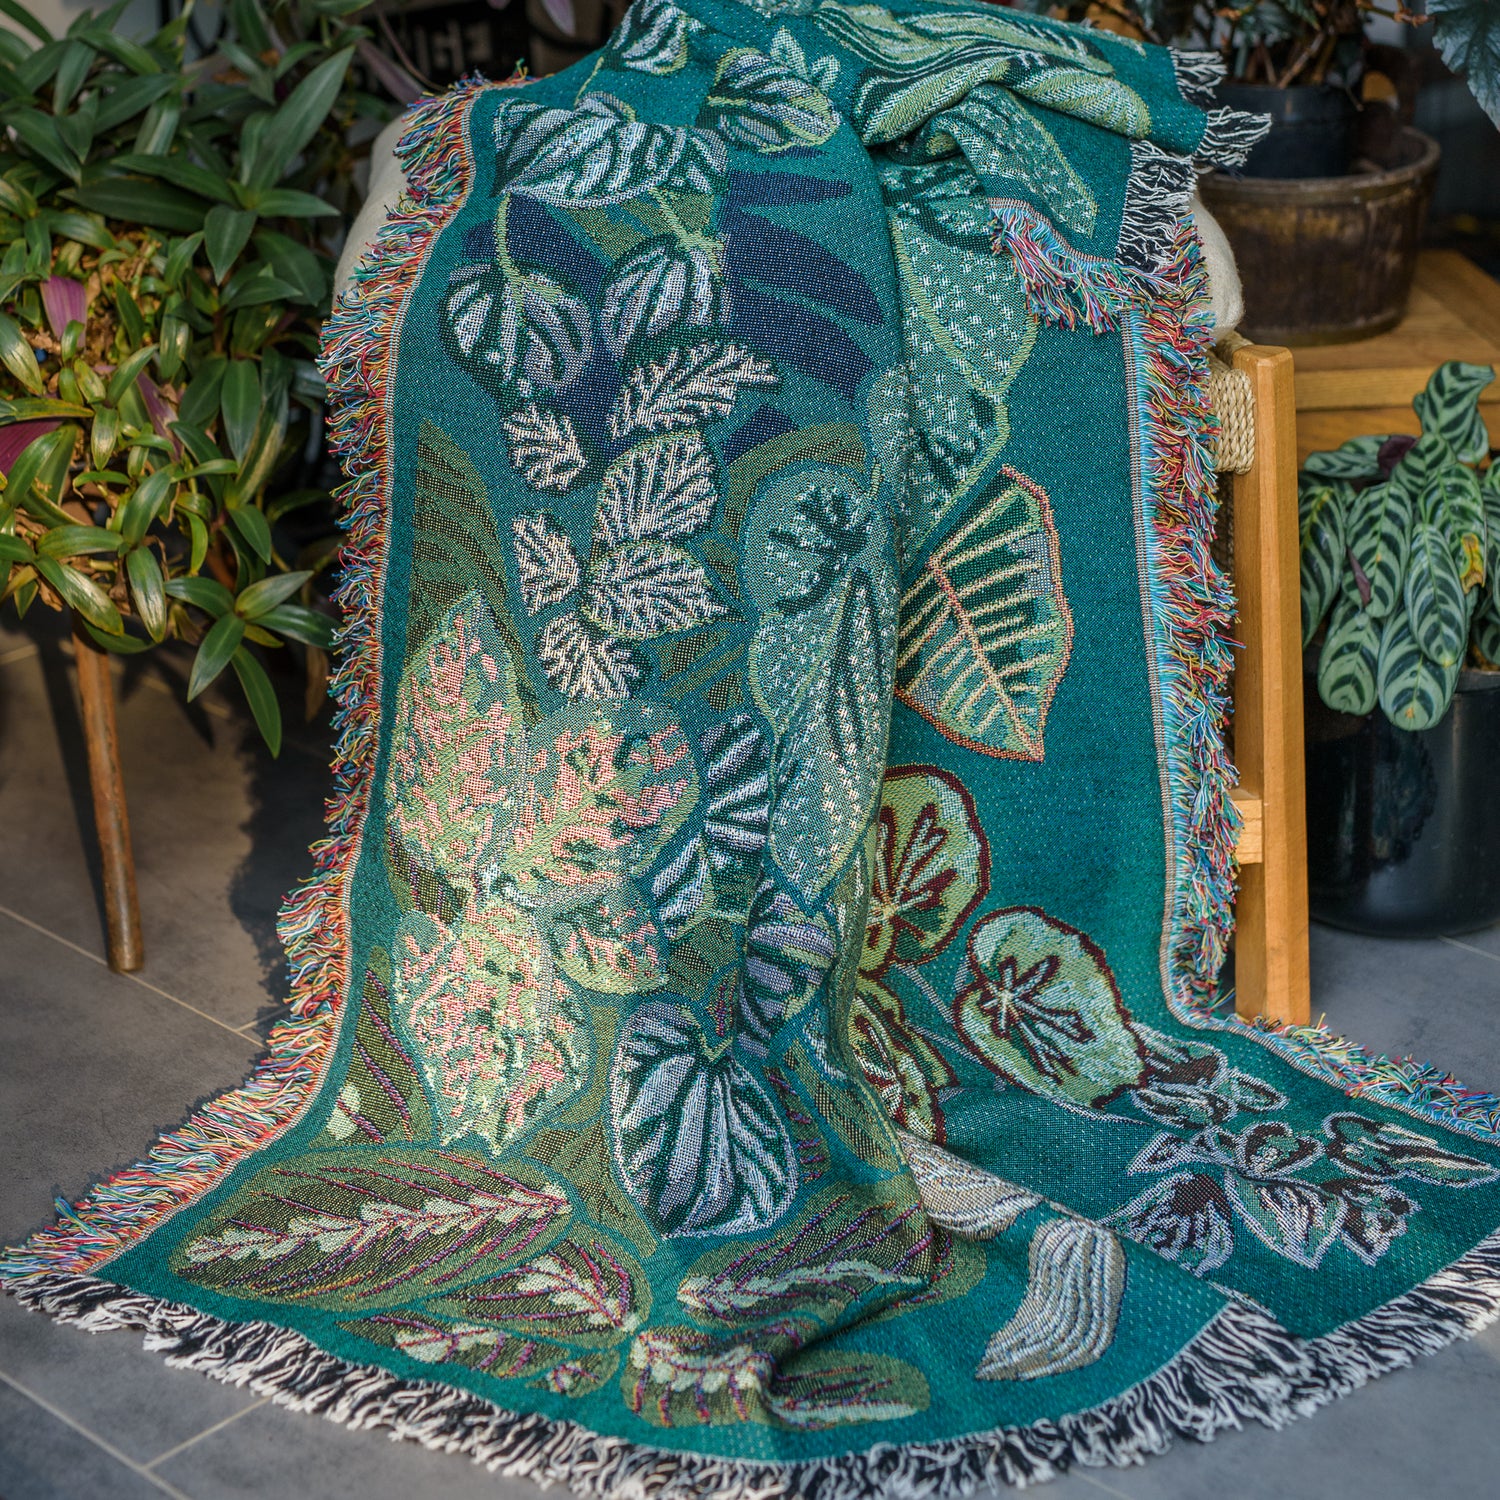 woven wrap blanket with fringe featuring lots of different houseplants draped over stool surrounded by houseplants